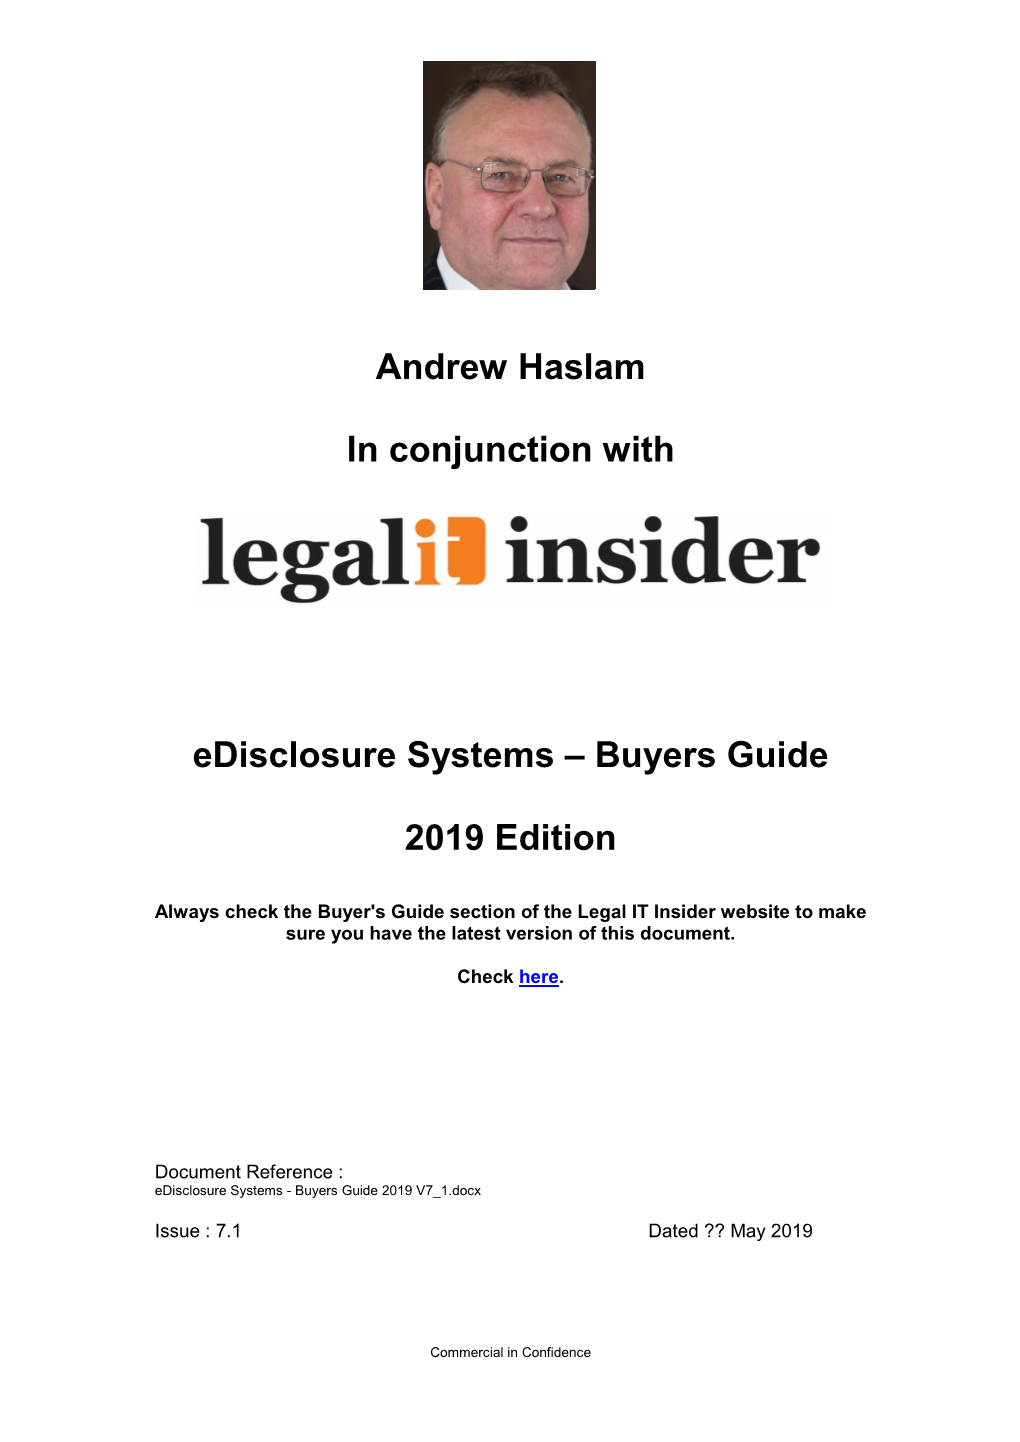 Andrew Haslam in Conjunction with Edisclosure Systems – Buyers